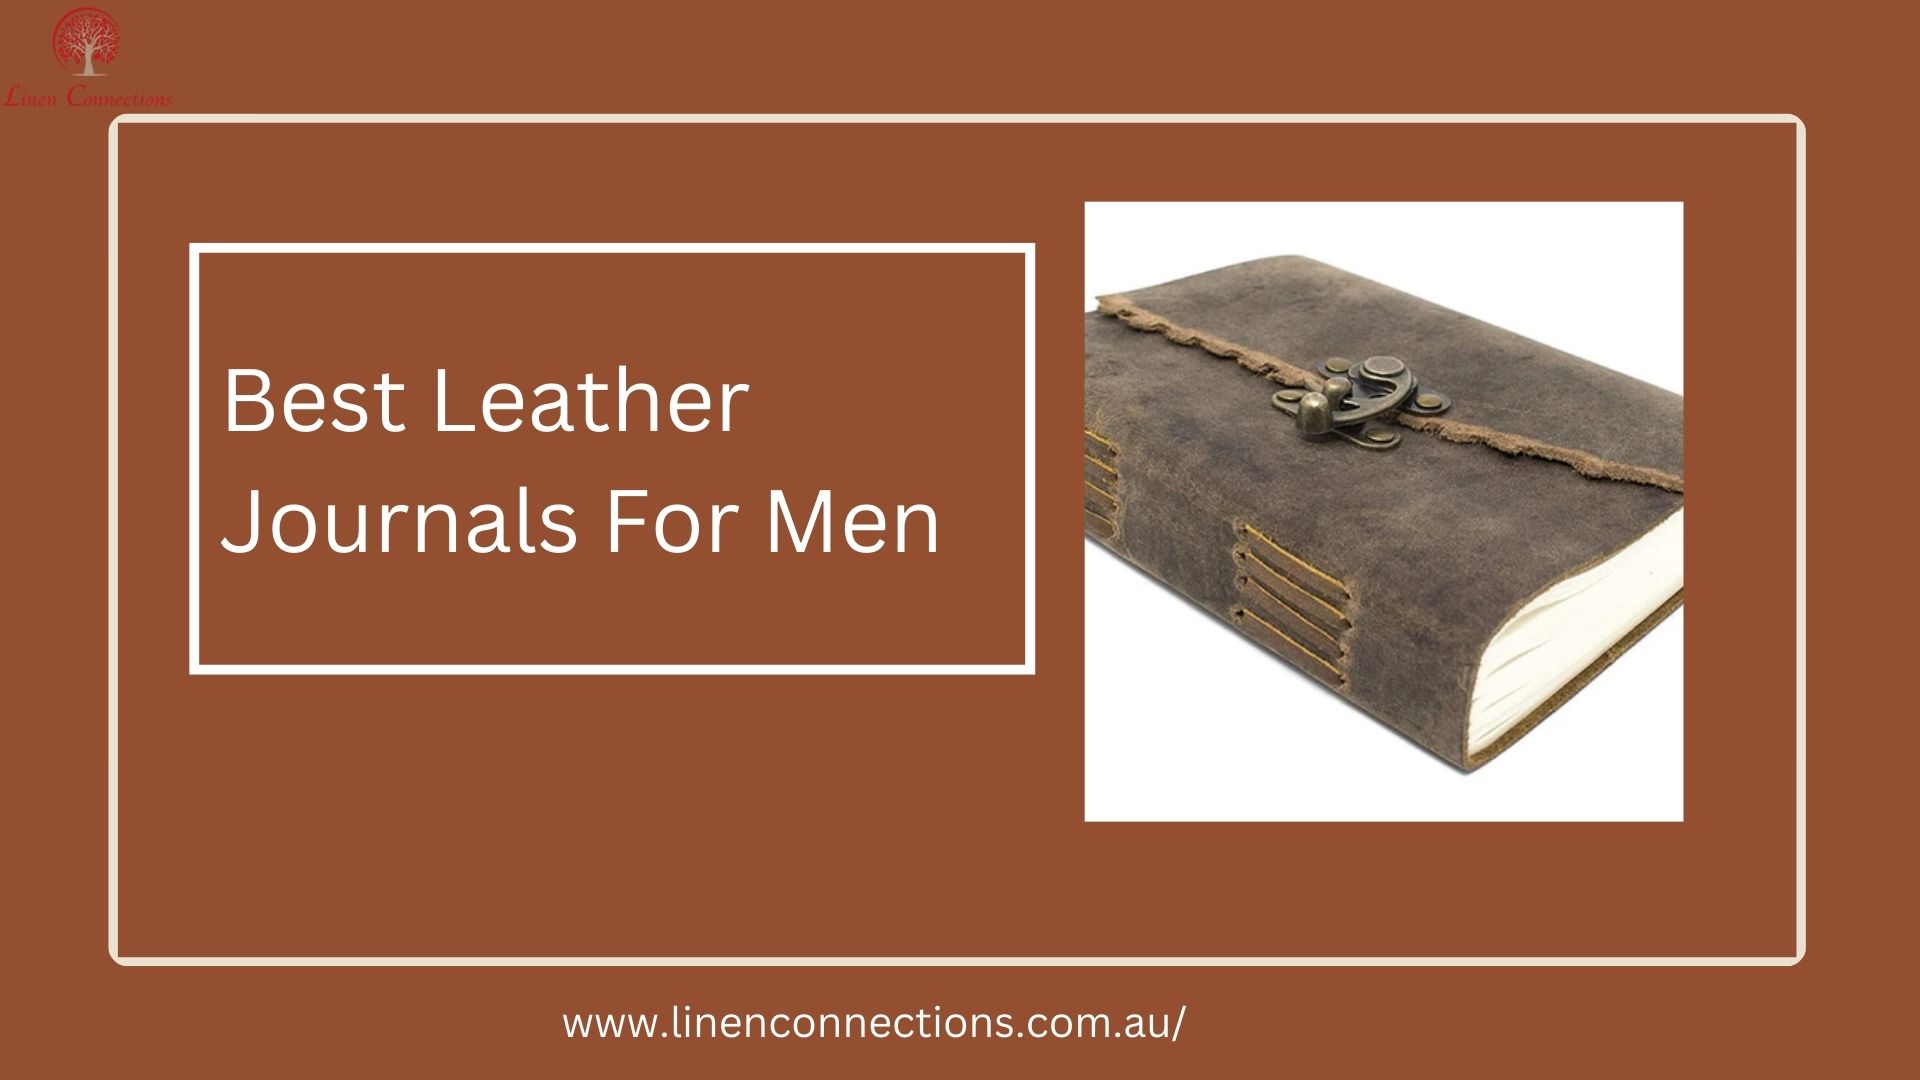 Who Should Consider Buying Best Leather Journals for Men? - UAP Daily